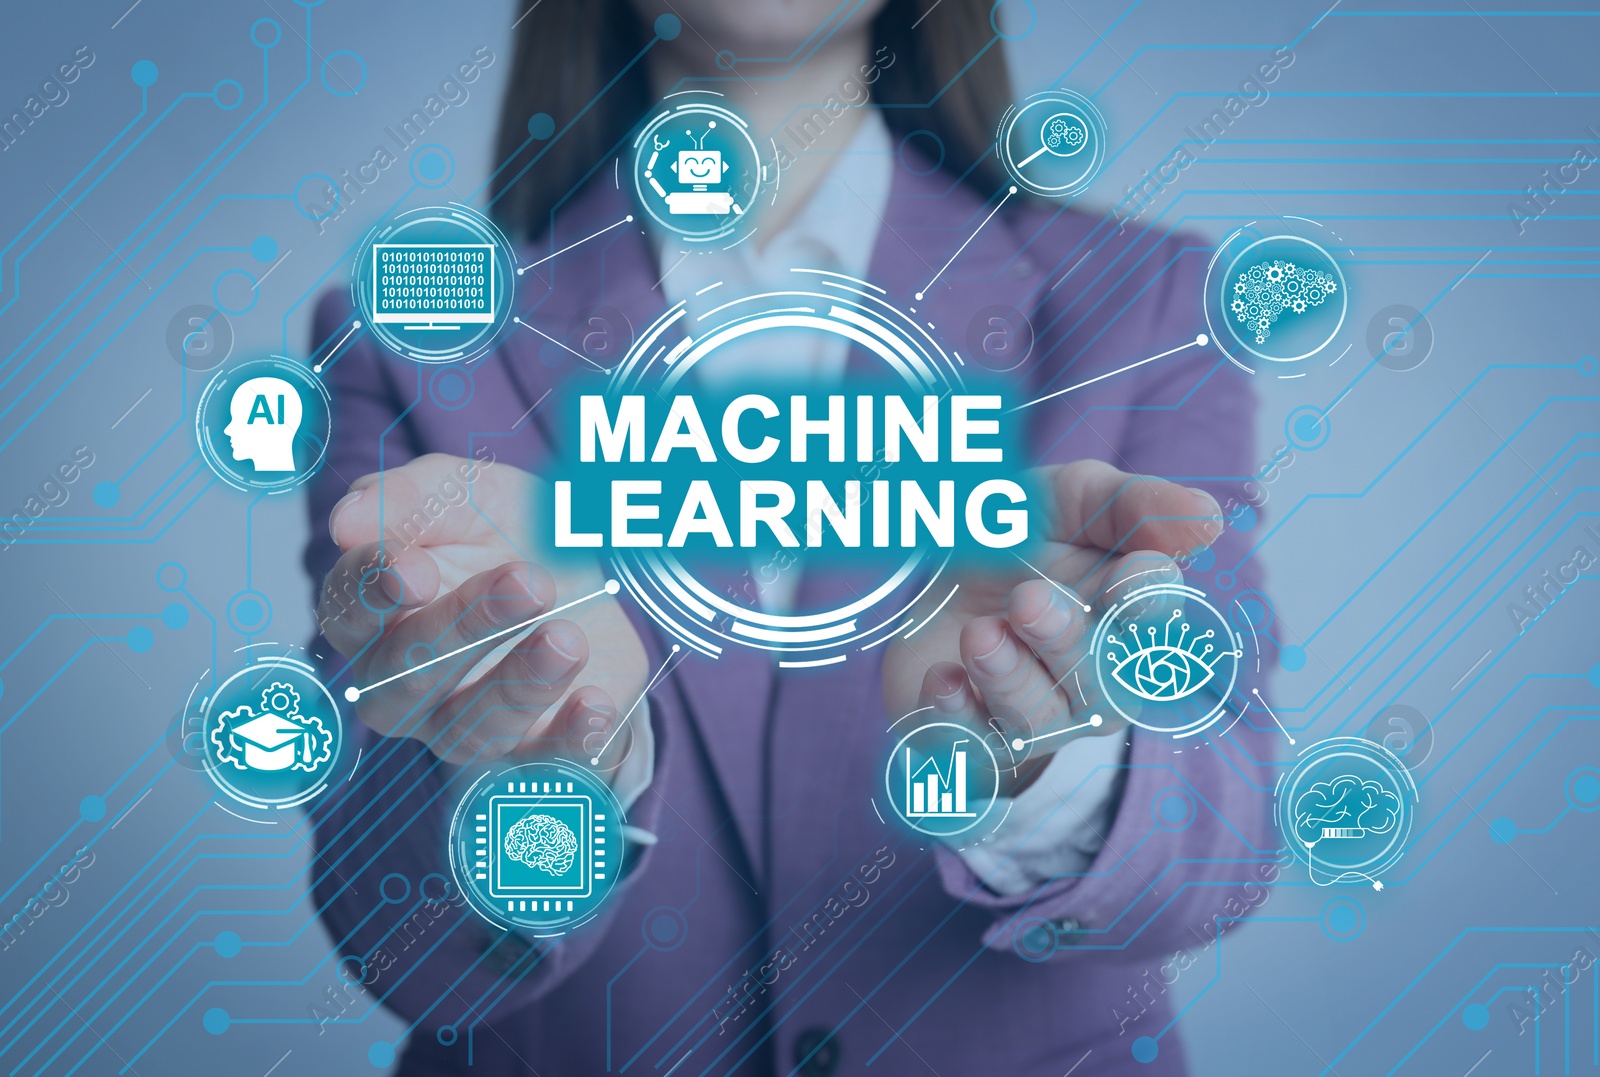 Image of Woman demonstrating machine learning model with linked icons, closeup